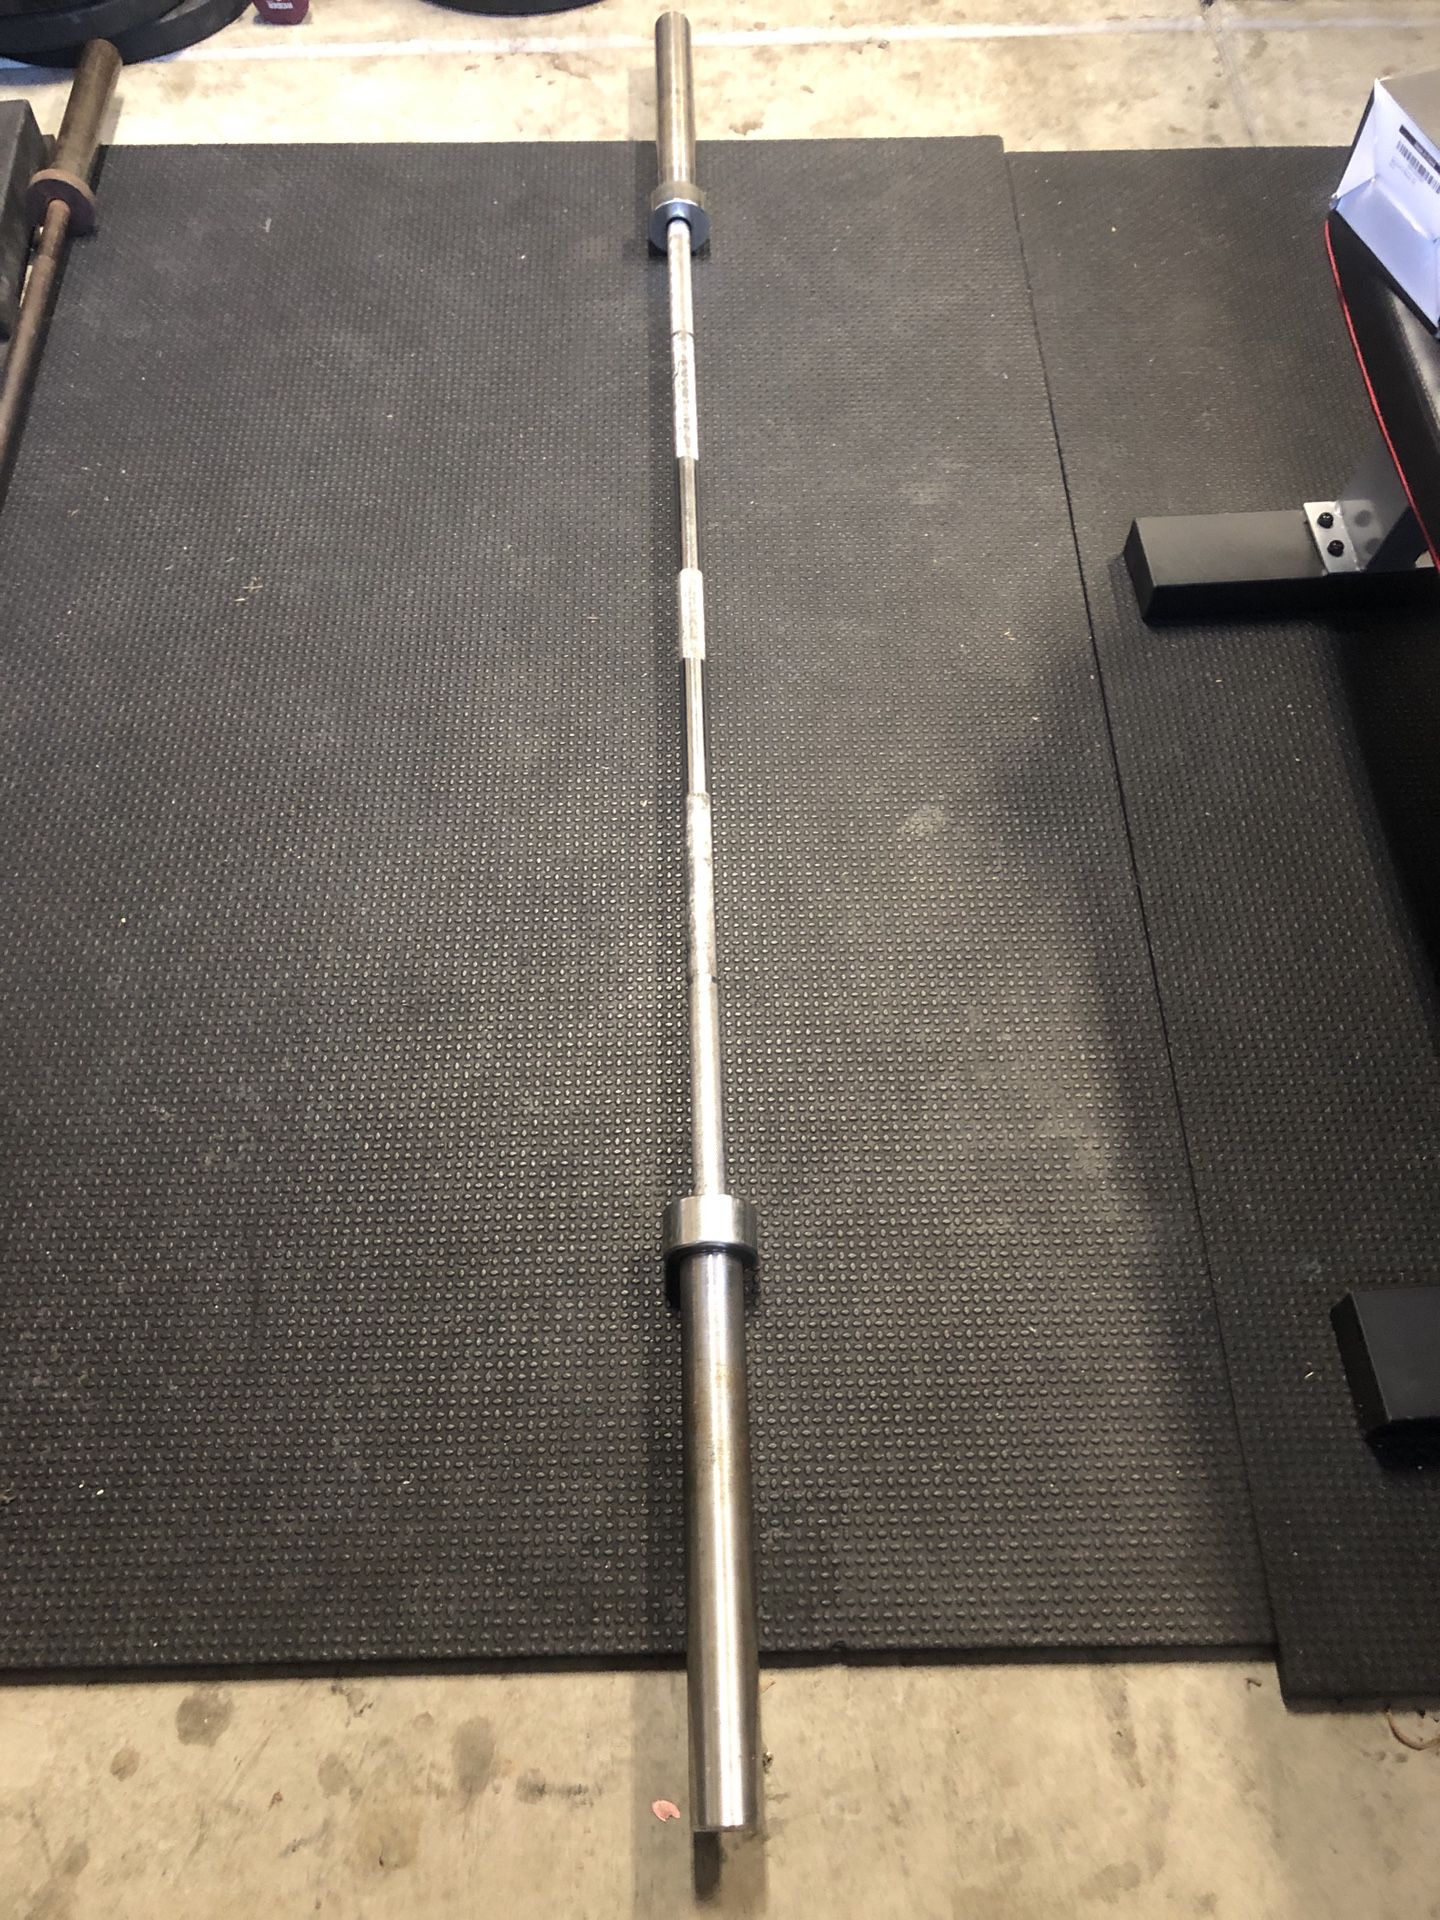 45lbs Barbell(Chinese) and 2- 35lbs metal plates for sale.